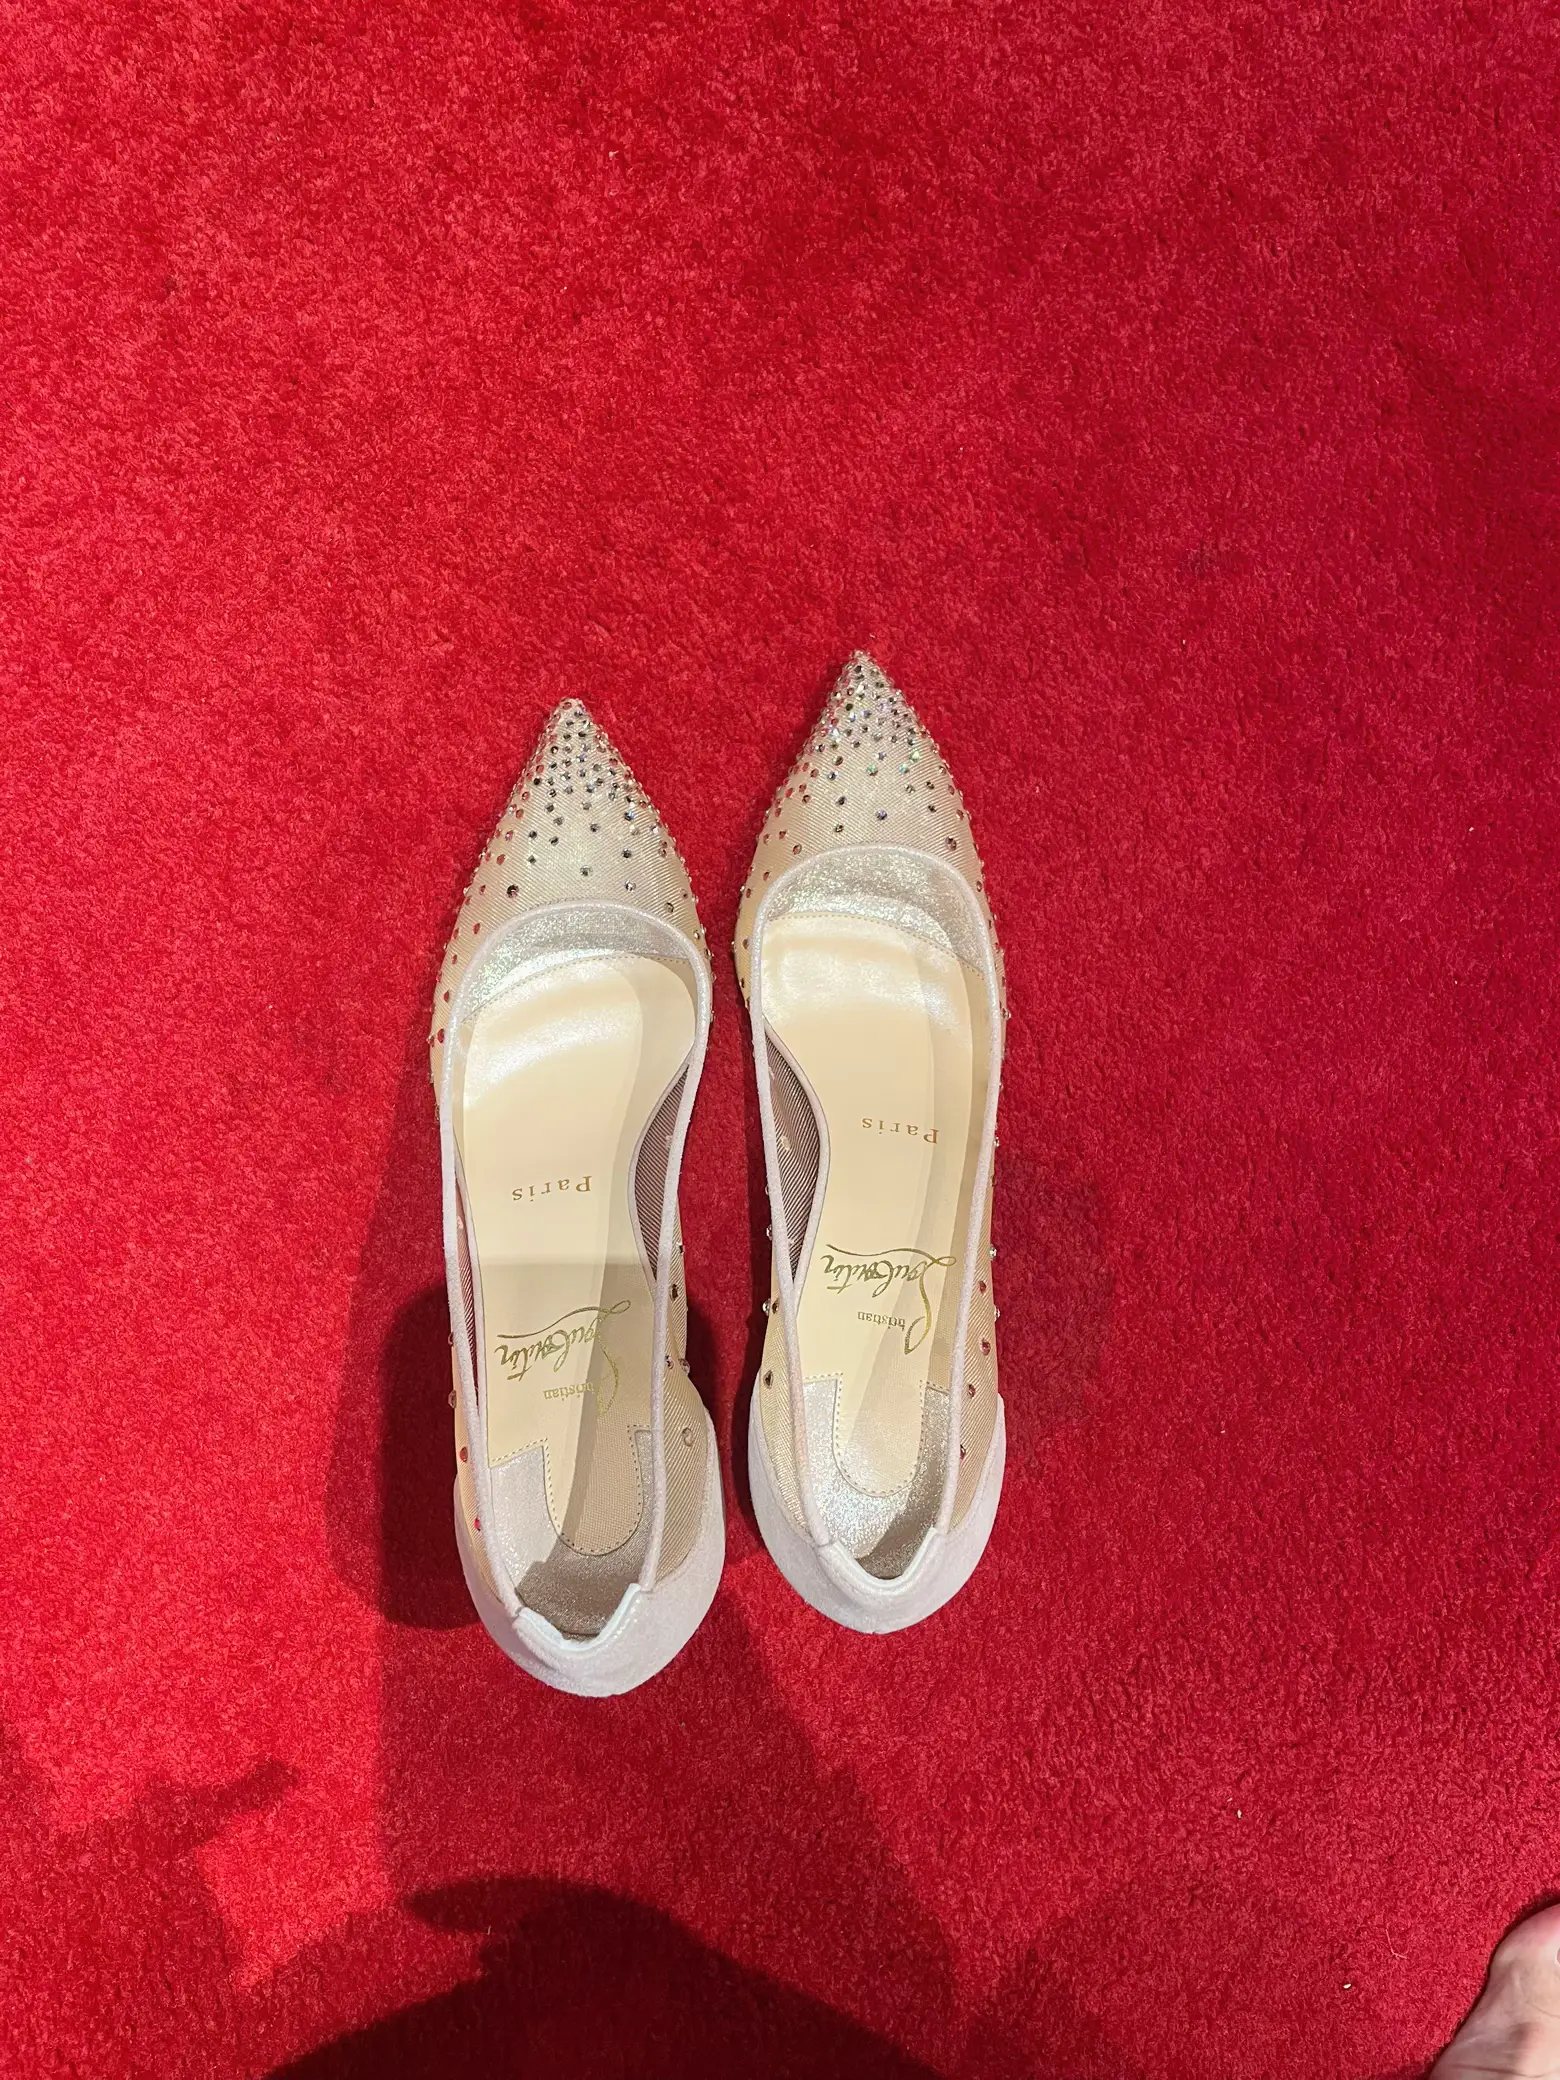 Christian Louboutin Bicester! Swipe for a surprise